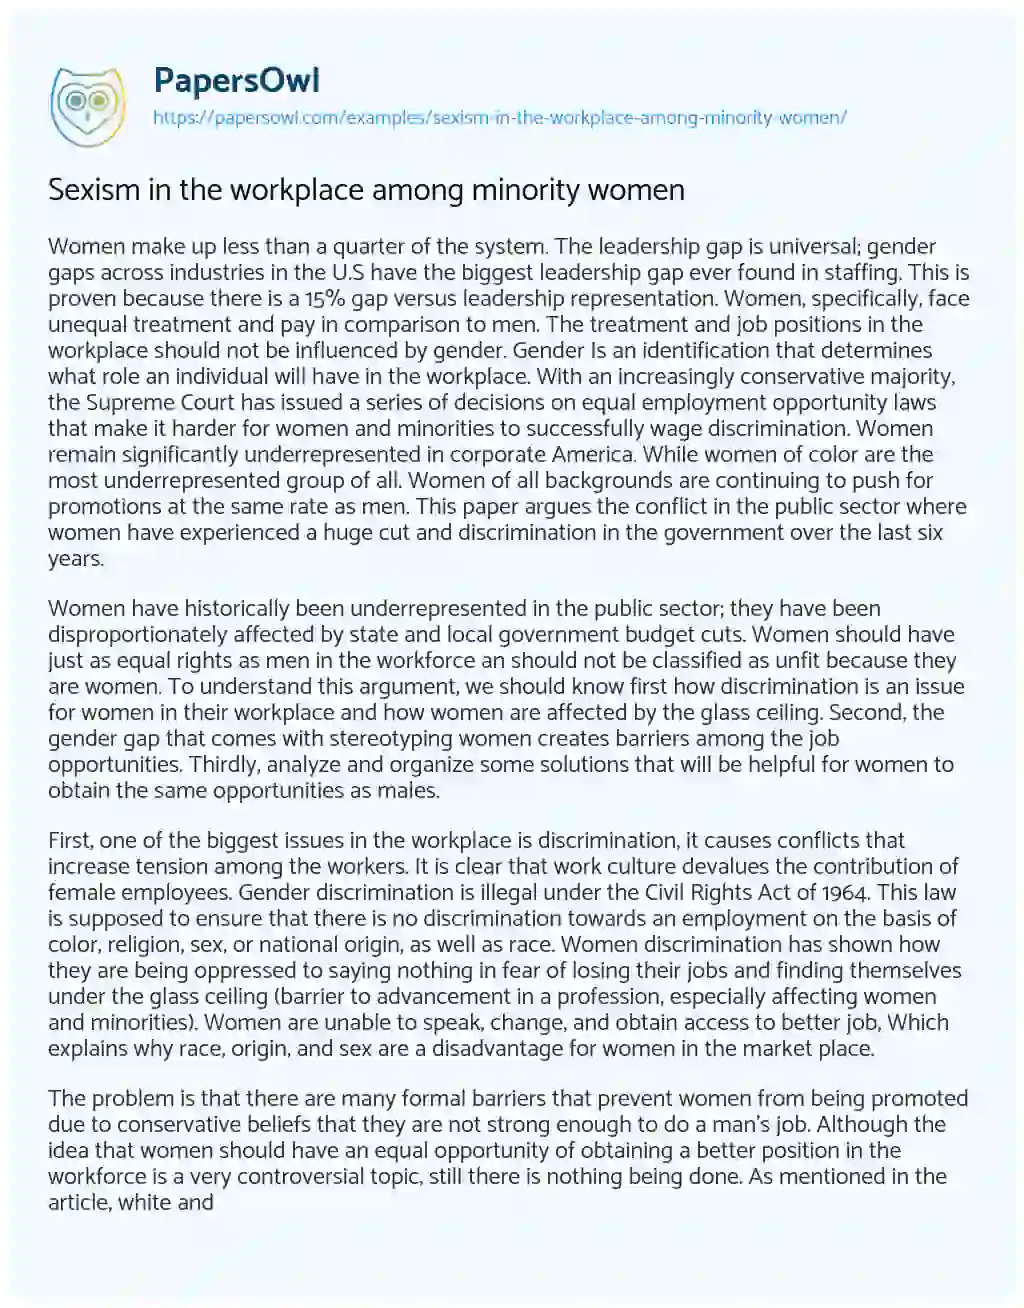 Essay on Sexism in the Workplace Among Minority Women